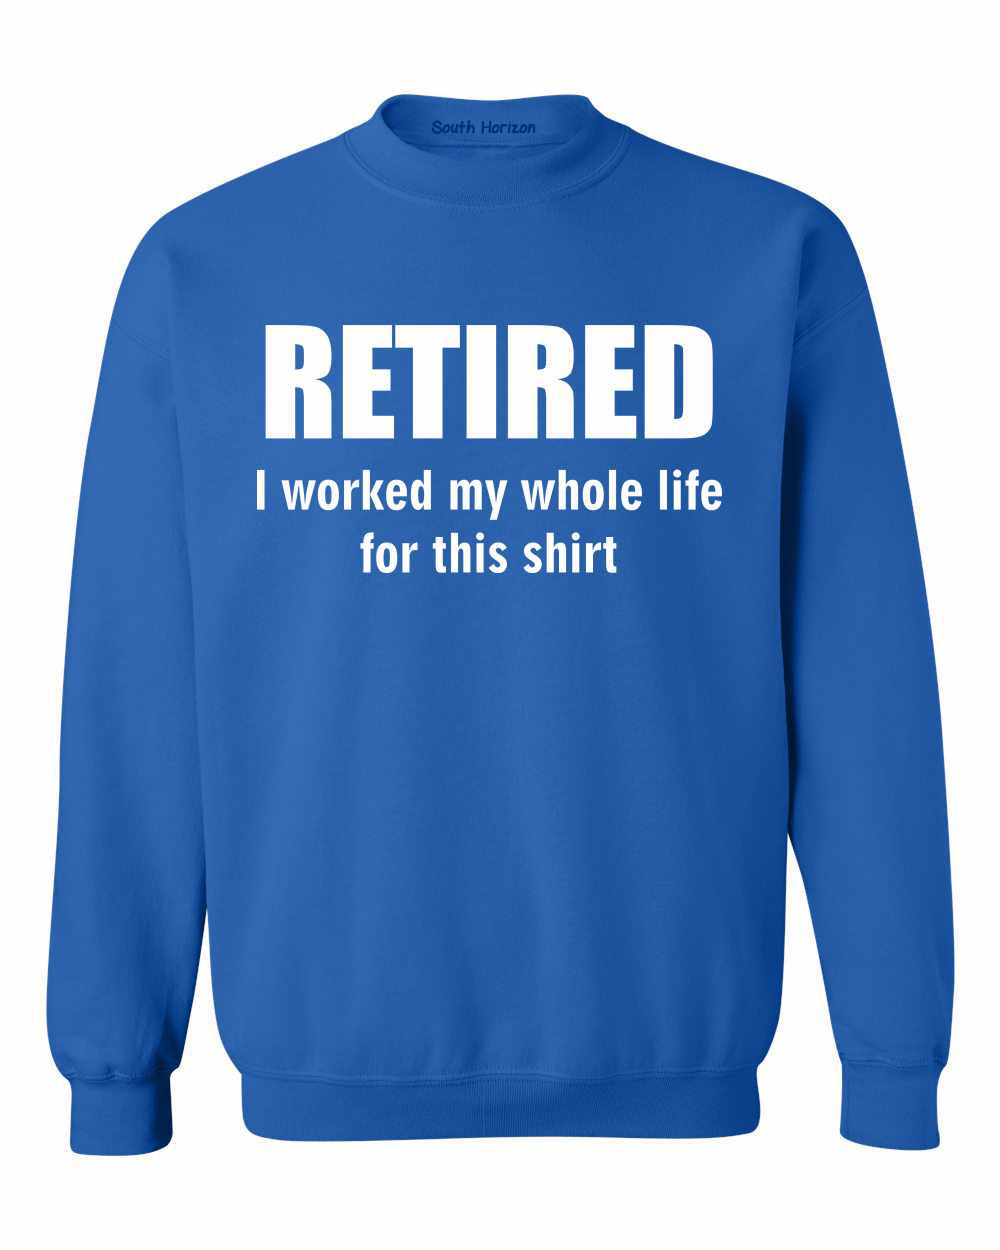 RETIRED, I worked my whole life for this shirt SweatShirt (#920-11)